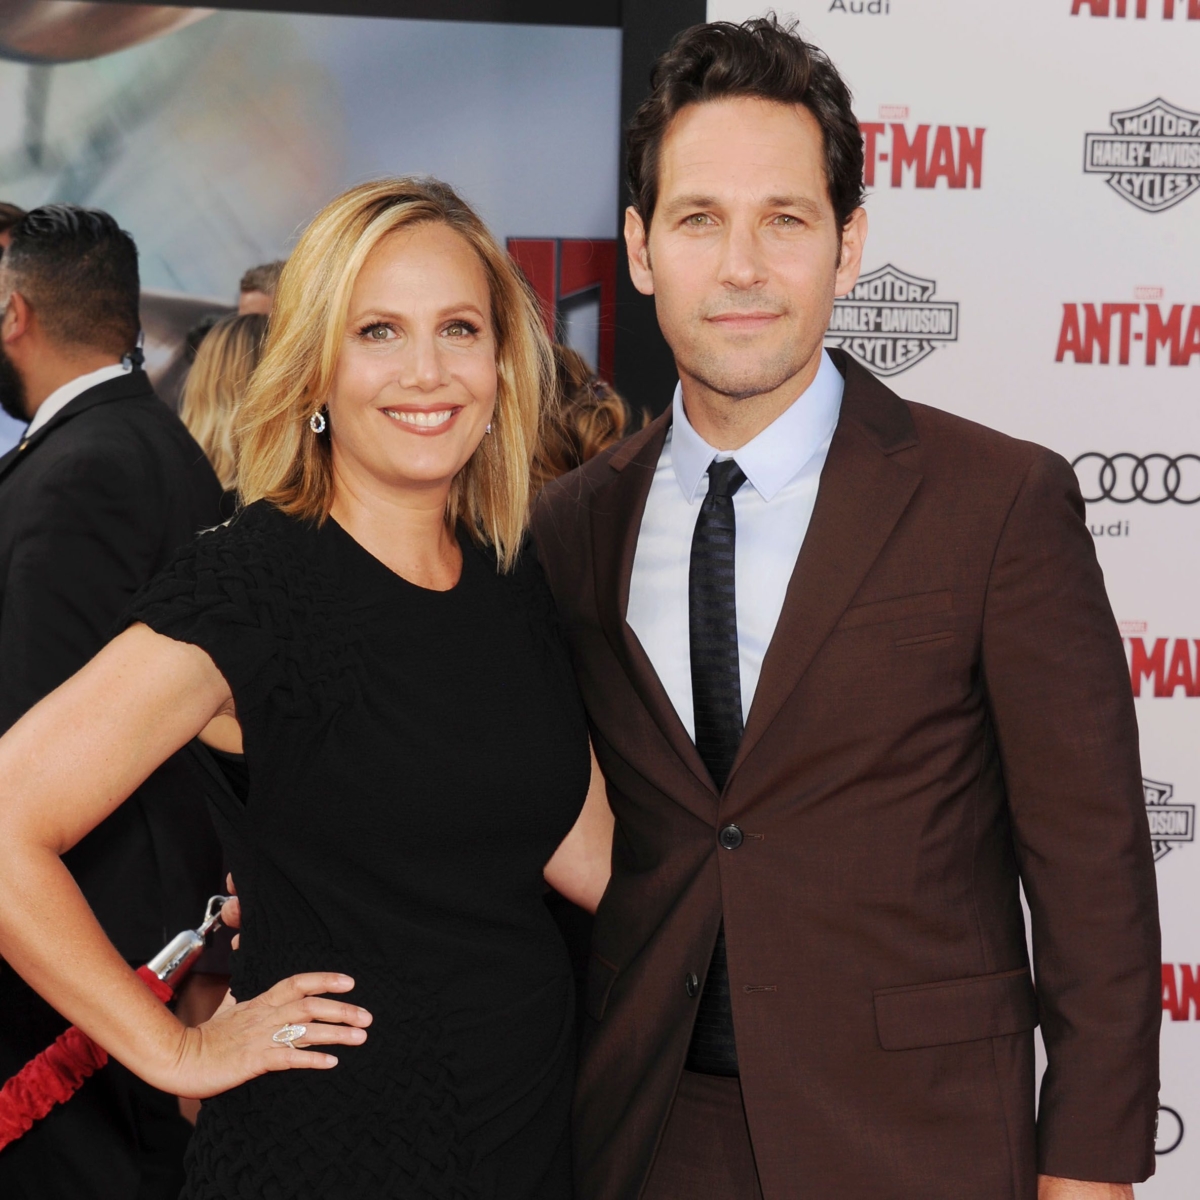 Paul Rudd's wife would have voted for Keanu Reeves as the sexiest man